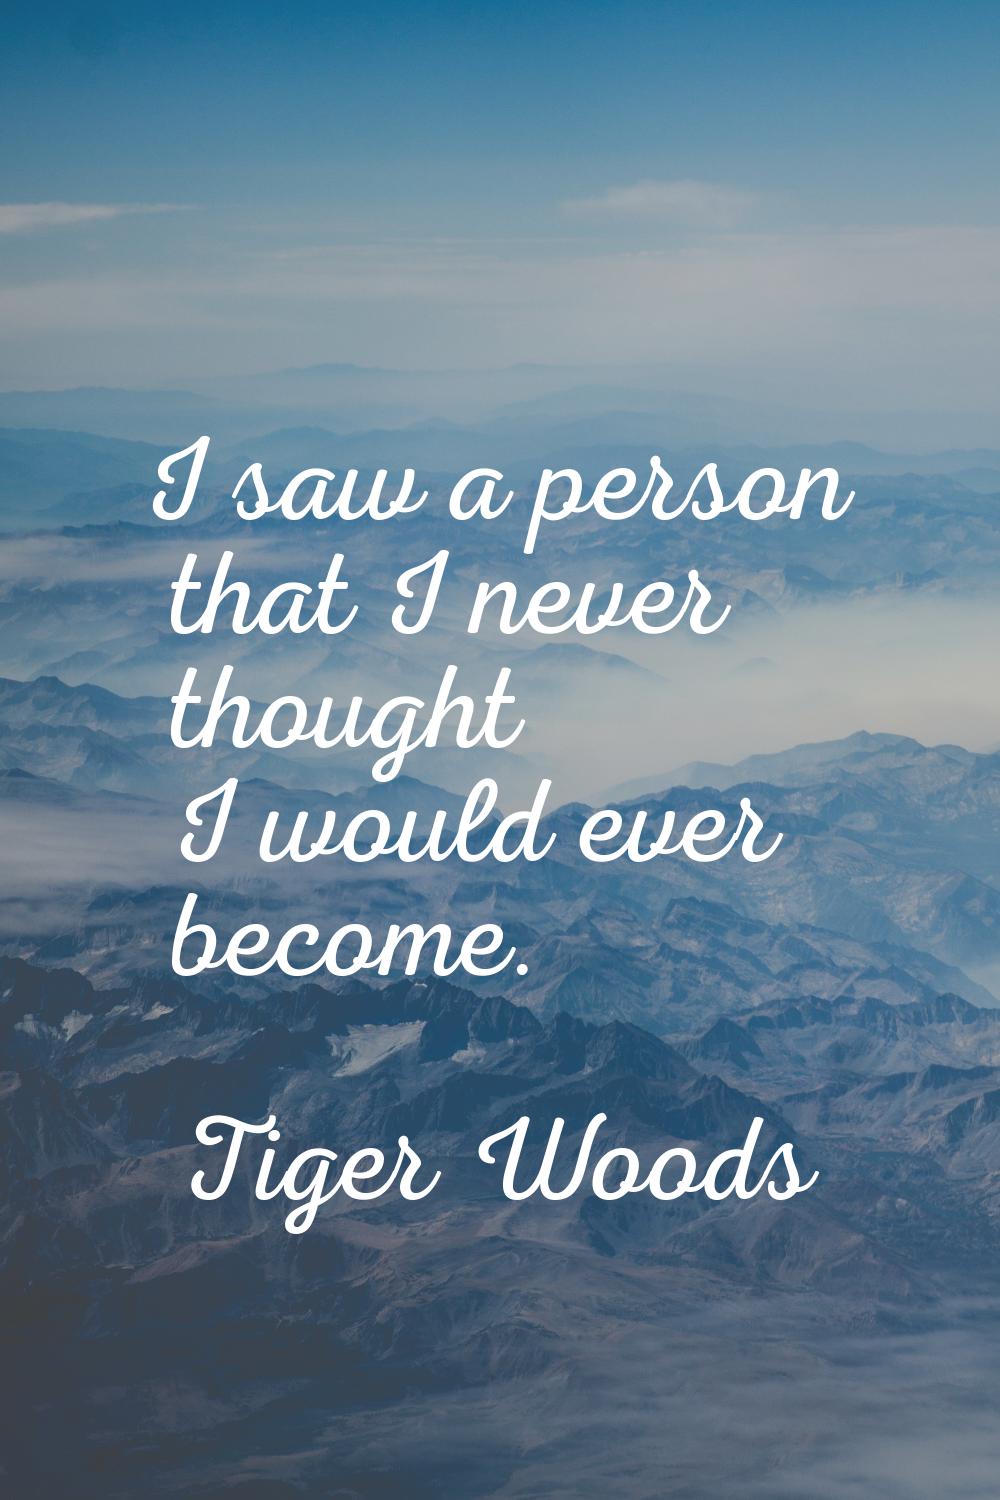 I saw a person that I never thought I would ever become.